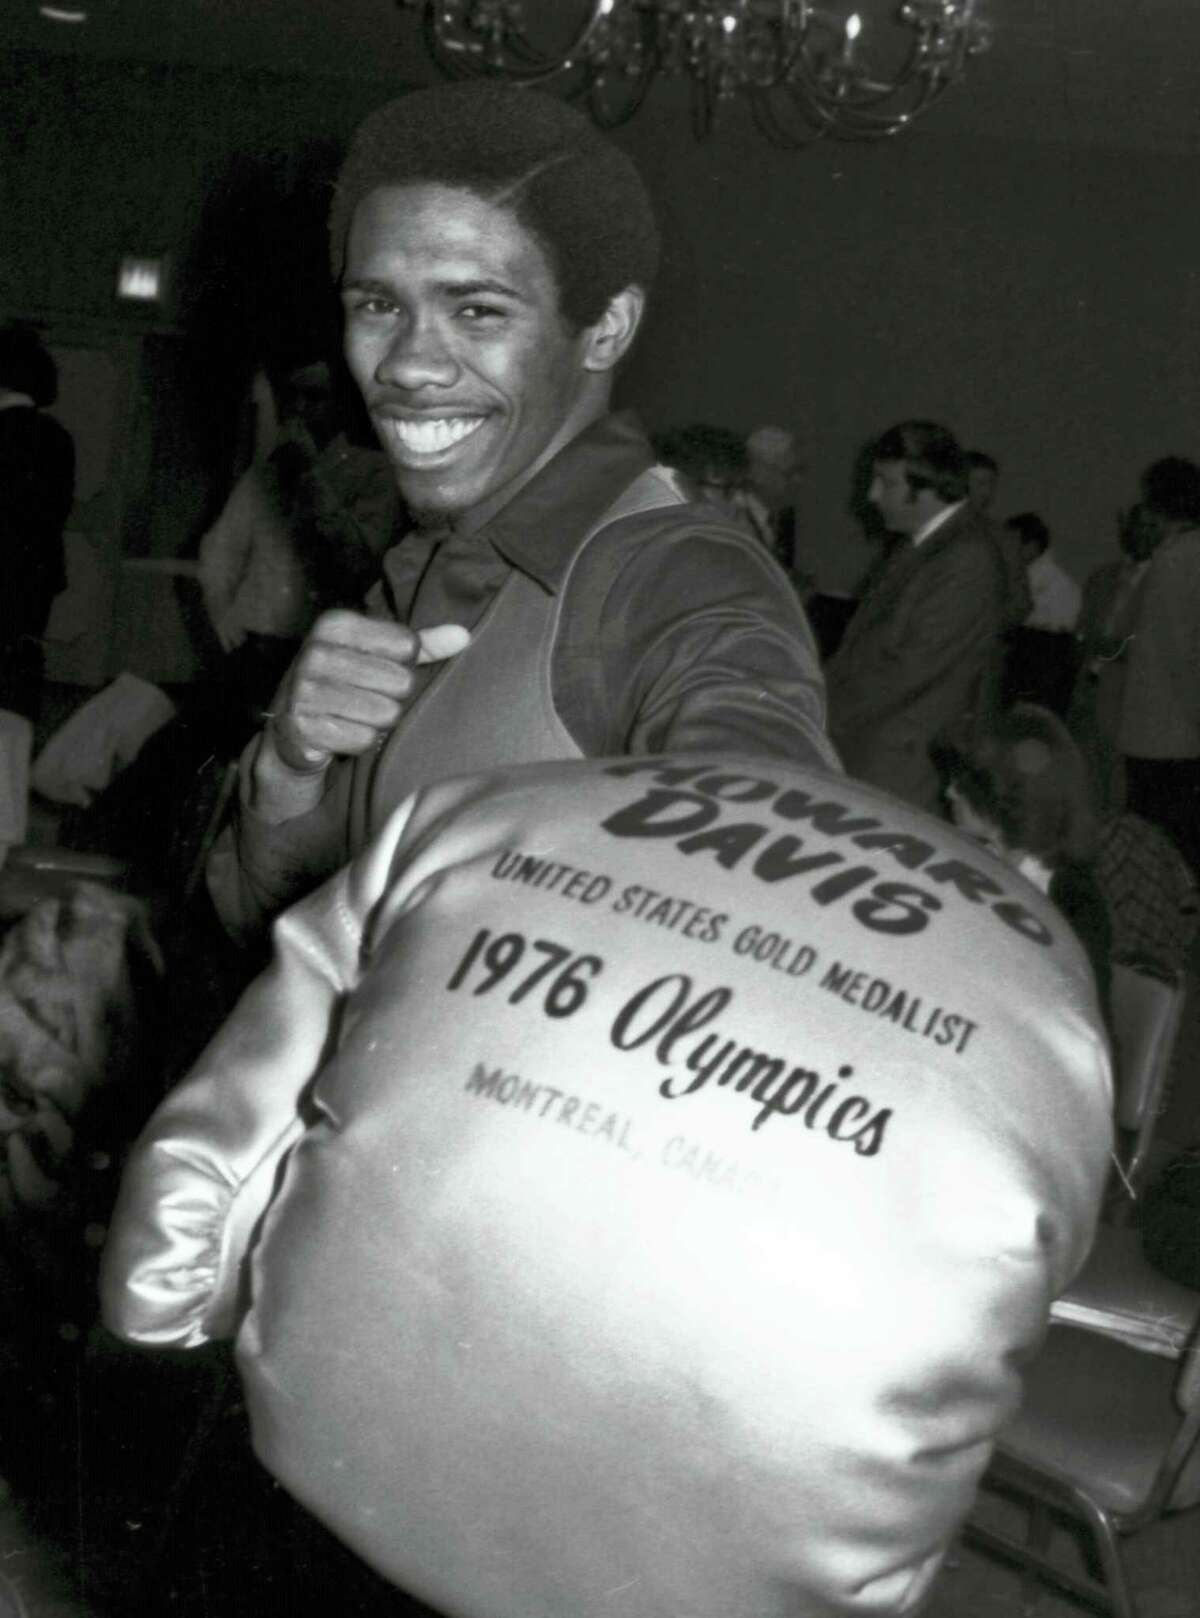 Howard Davis, the Olympic gold medal winner in the lightweight boxing division in 1976, died Wednesday in Florida. He was 59. In the 1976 Olympics, Davis was voted the outstanding boxer, out-polling such champions as Sugar Ray Leonard.